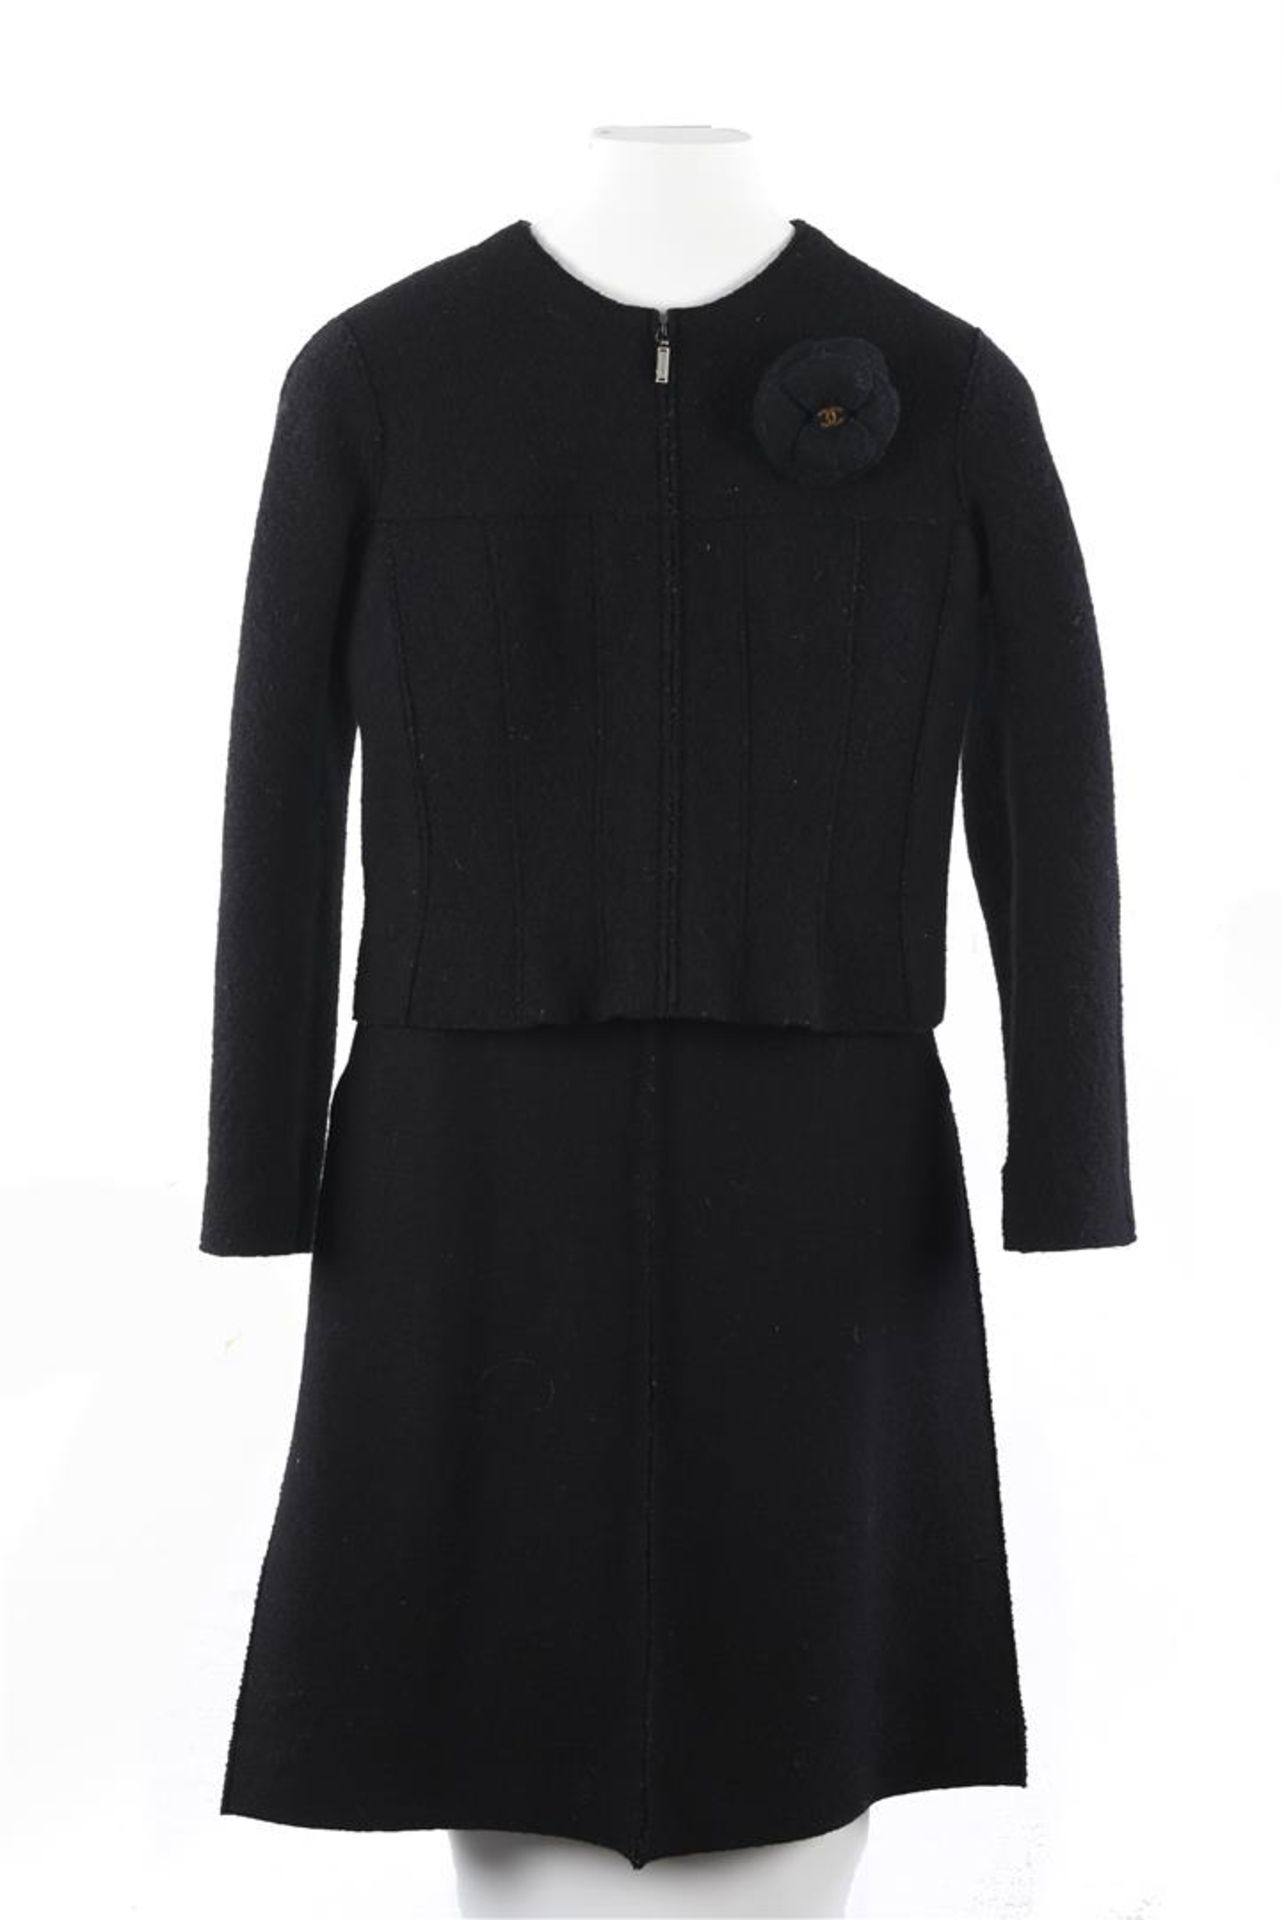 Chanel, Identification, black wool deux-piece, jacket and skirt. Size 40 Fr.